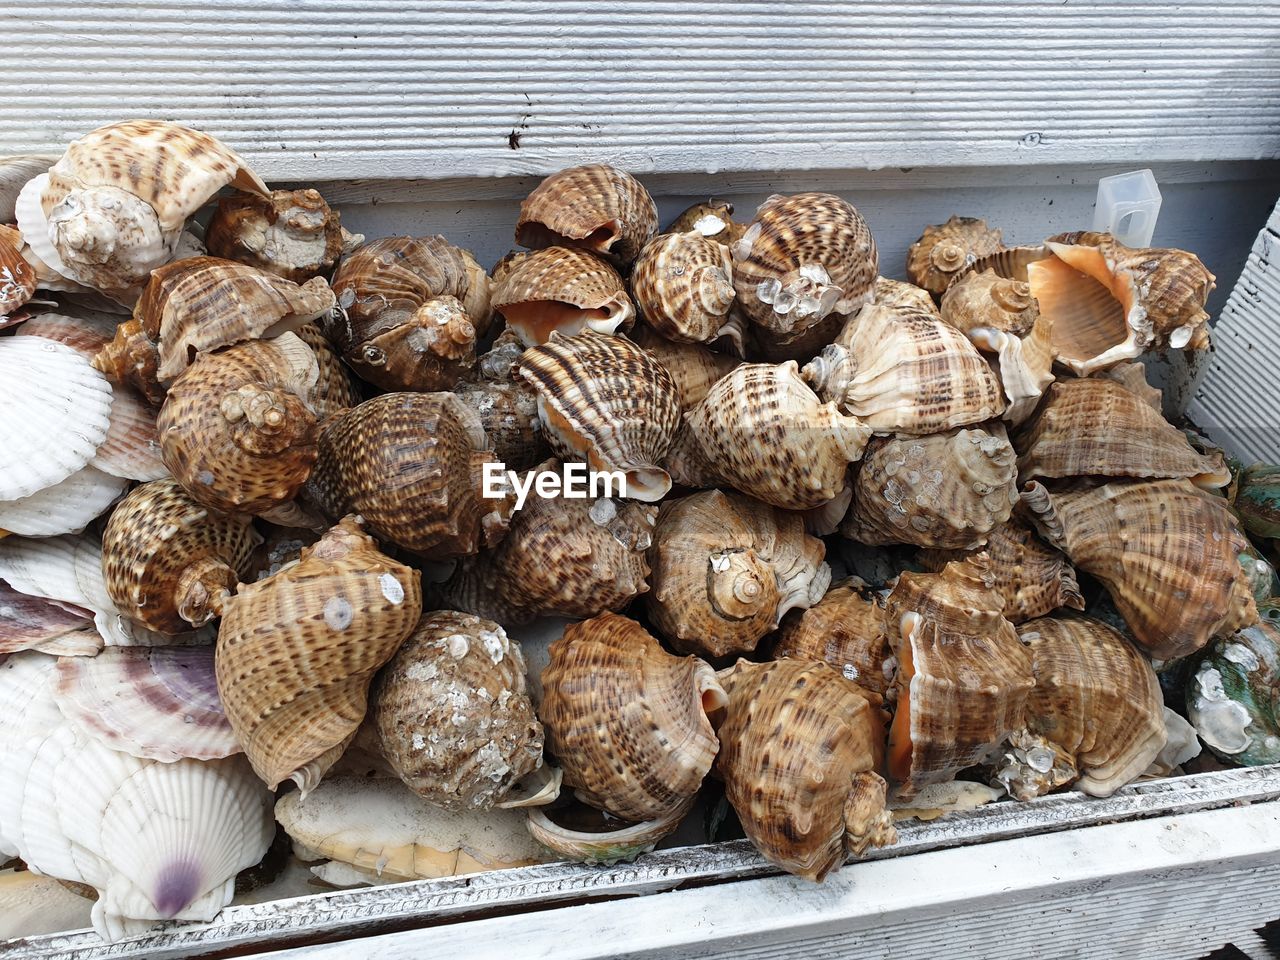 HIGH ANGLE VIEW OF SHELLS AT MARKET STALL